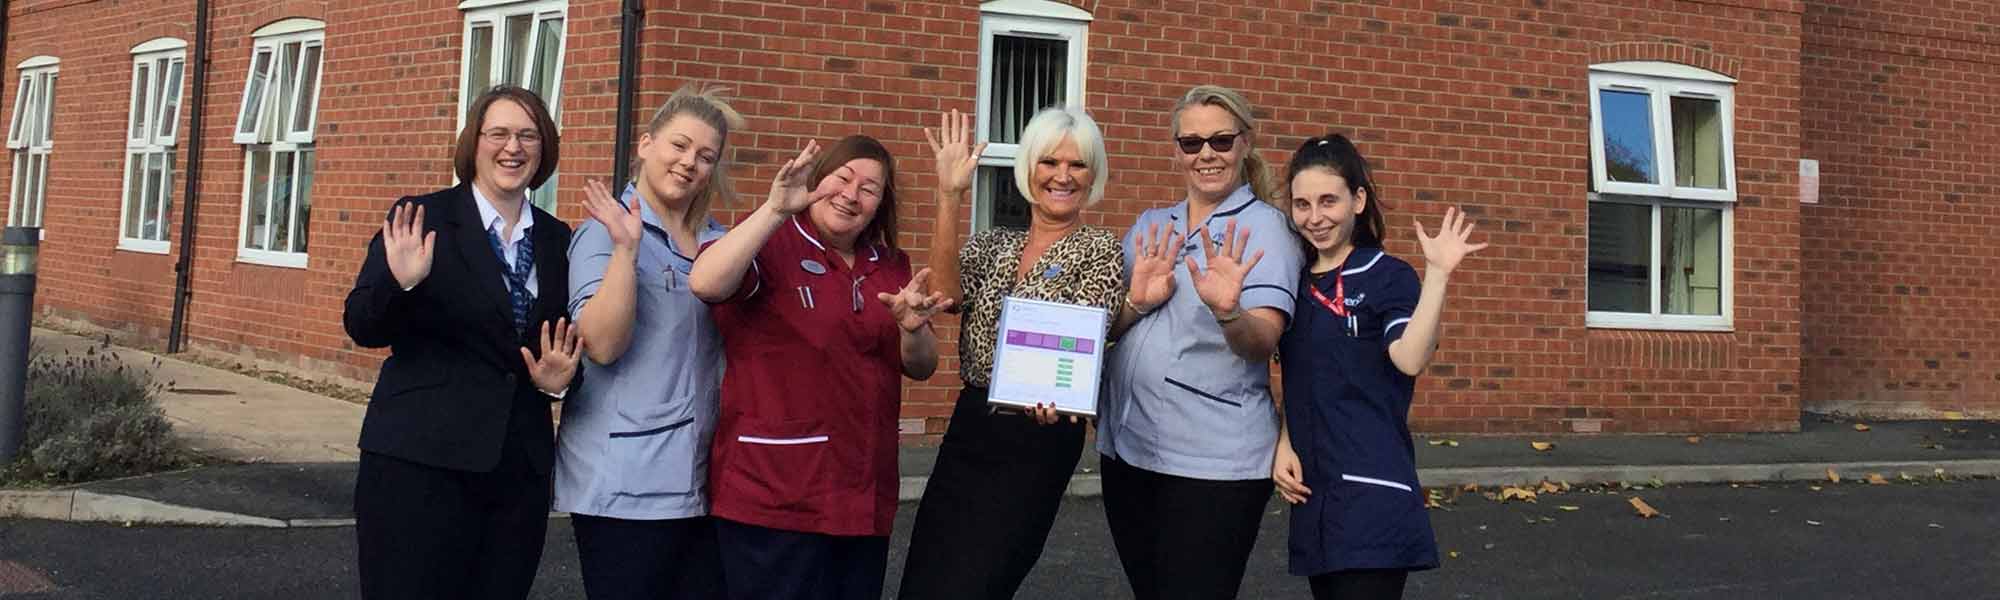 Amarna House Care Home CQC Good in all Categories team wave smiles